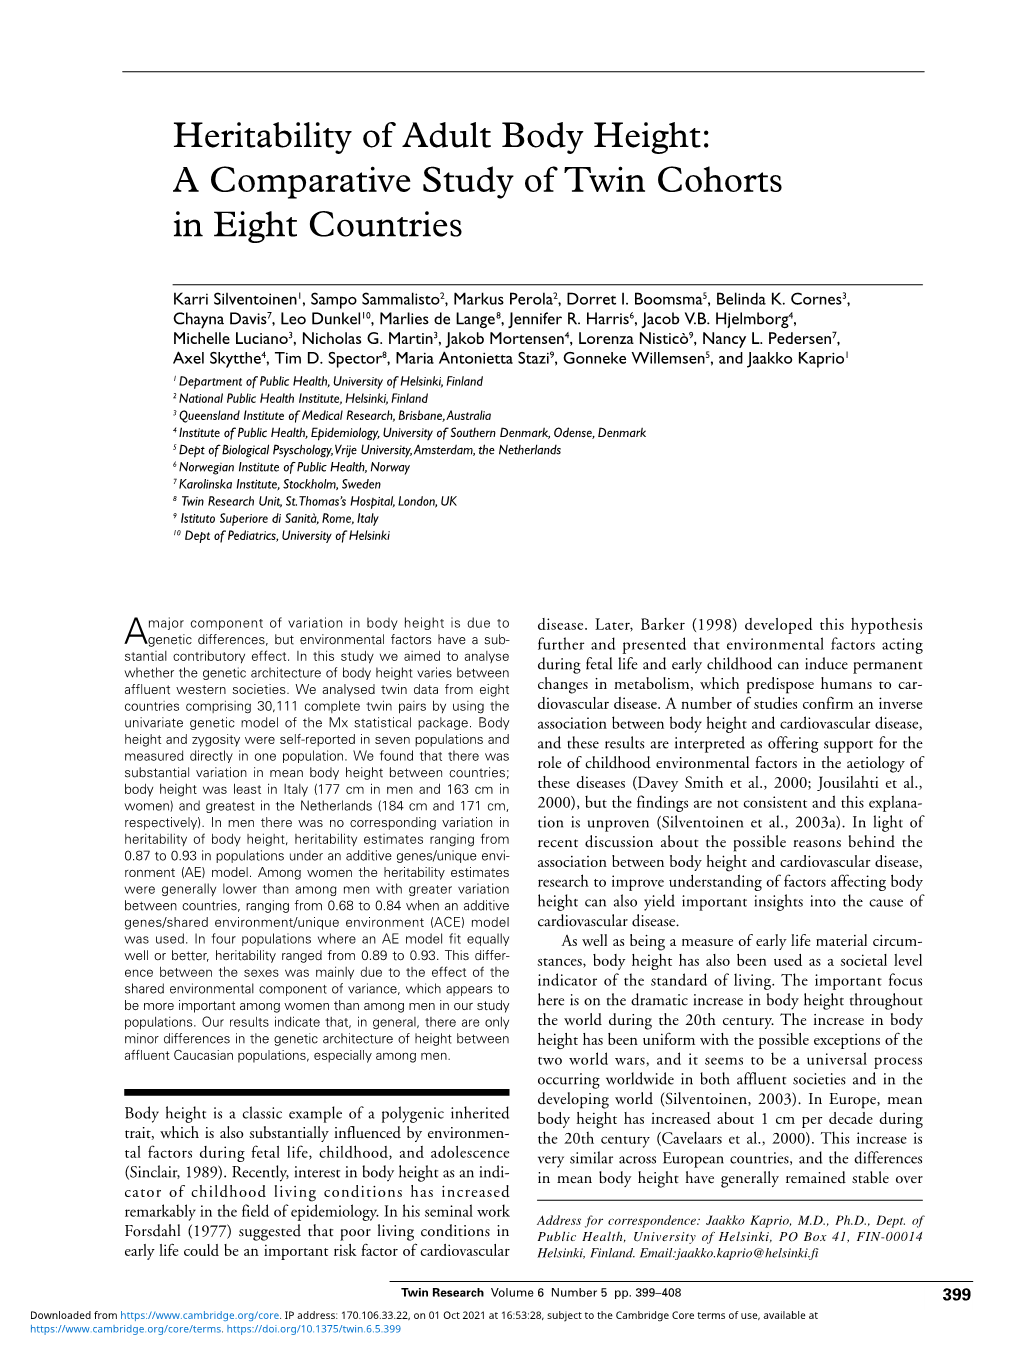 Heritability of Adult Body Height: a Comparative Study of Twin Cohorts in Eight Countries